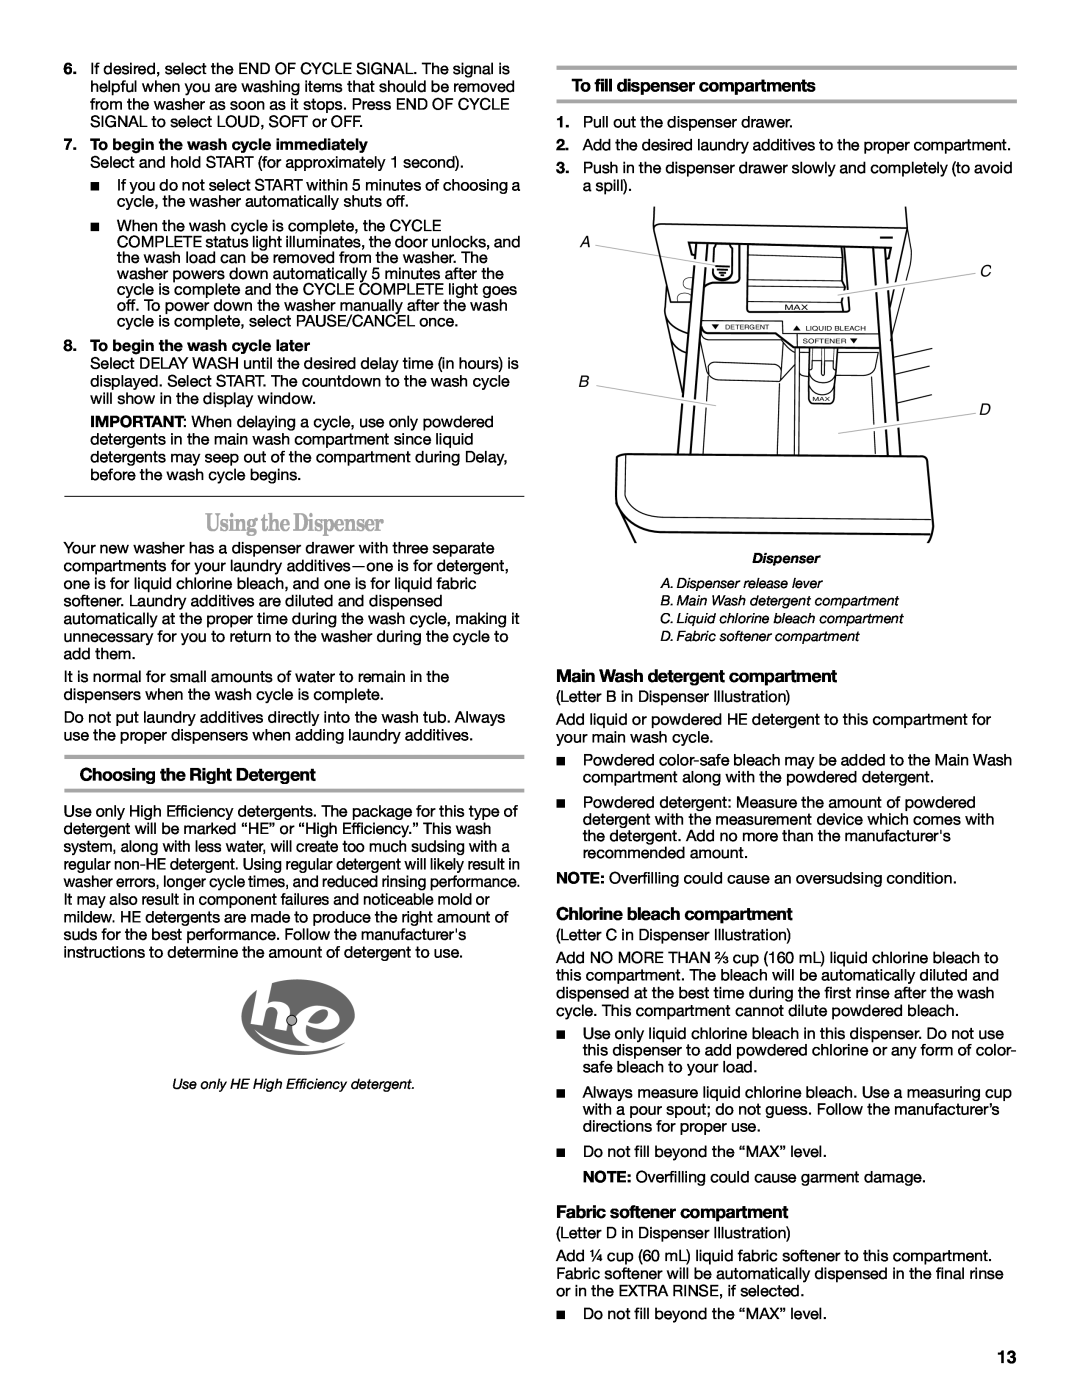 Whirlpool W10063560 manual UsingtheDispenser, Choosing the Right Detergent, To fill dispenser compartments 